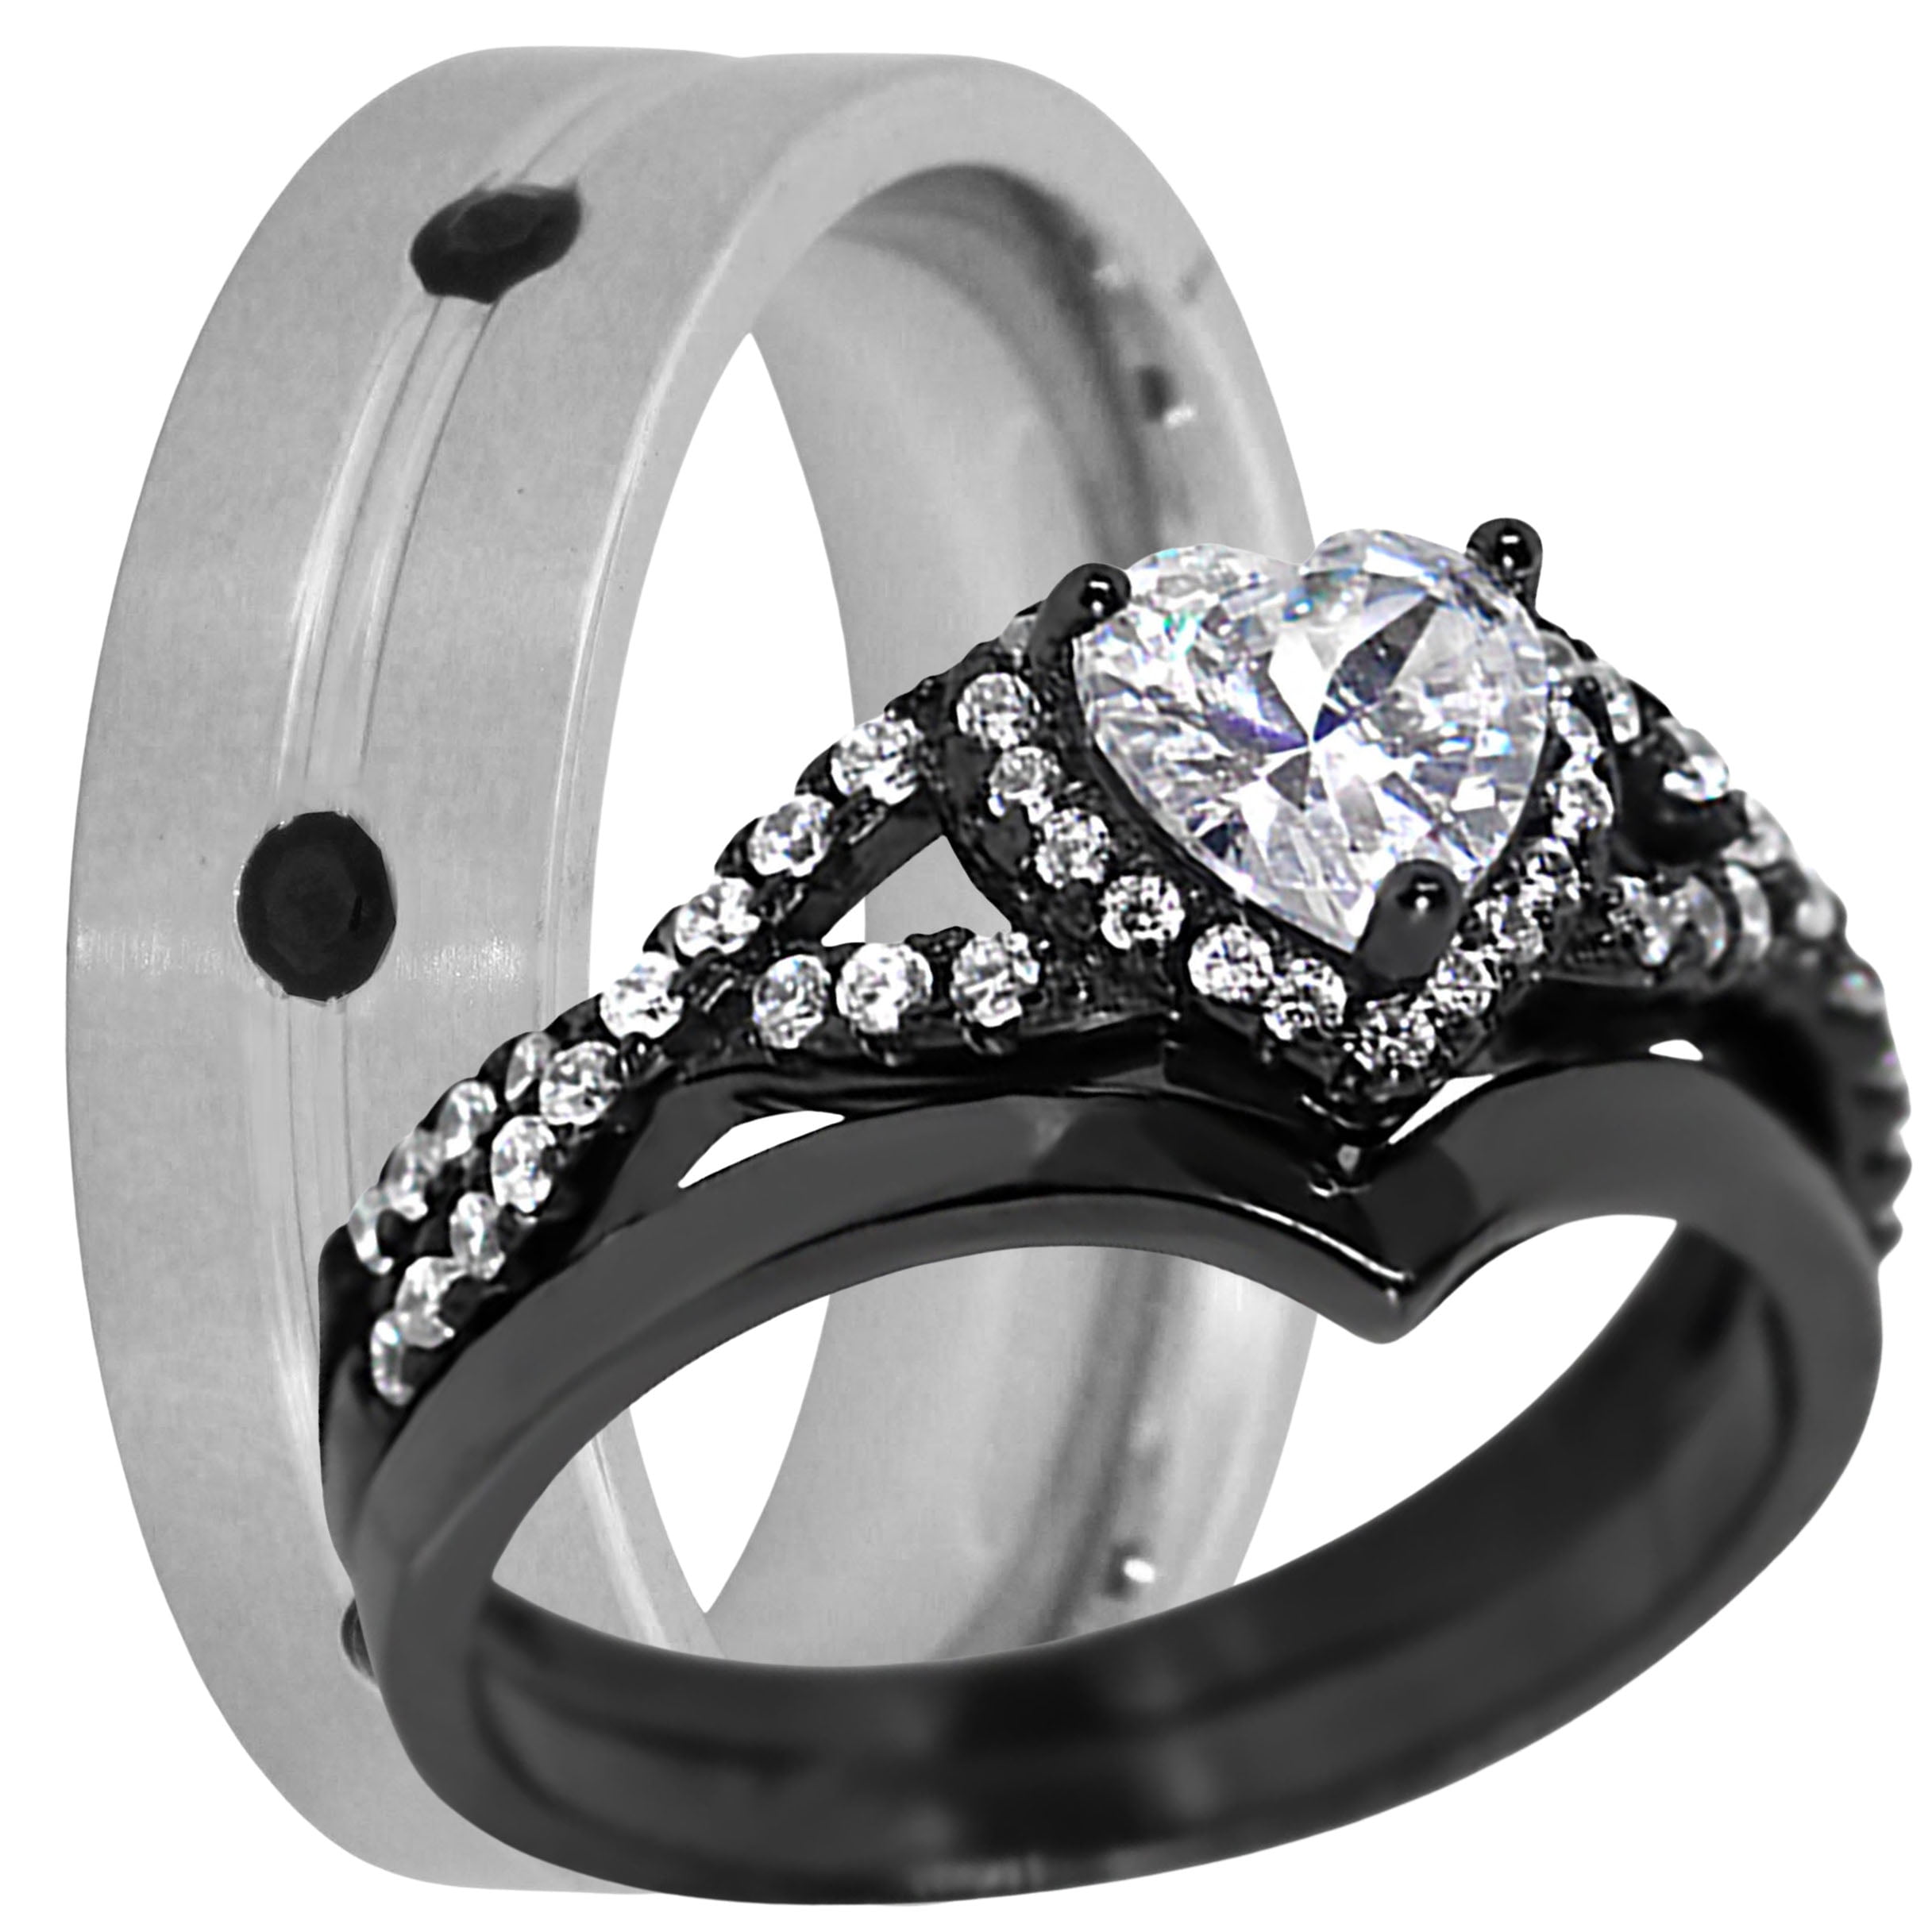 His Her Couples TRIO Wedding Set Black Wedding Rings for Women Size 10 and Men Size 10 9ed450f7 0574 4f8c a00c bd9790728b2b.60990c79533f9793e96fc2ac79692dc7